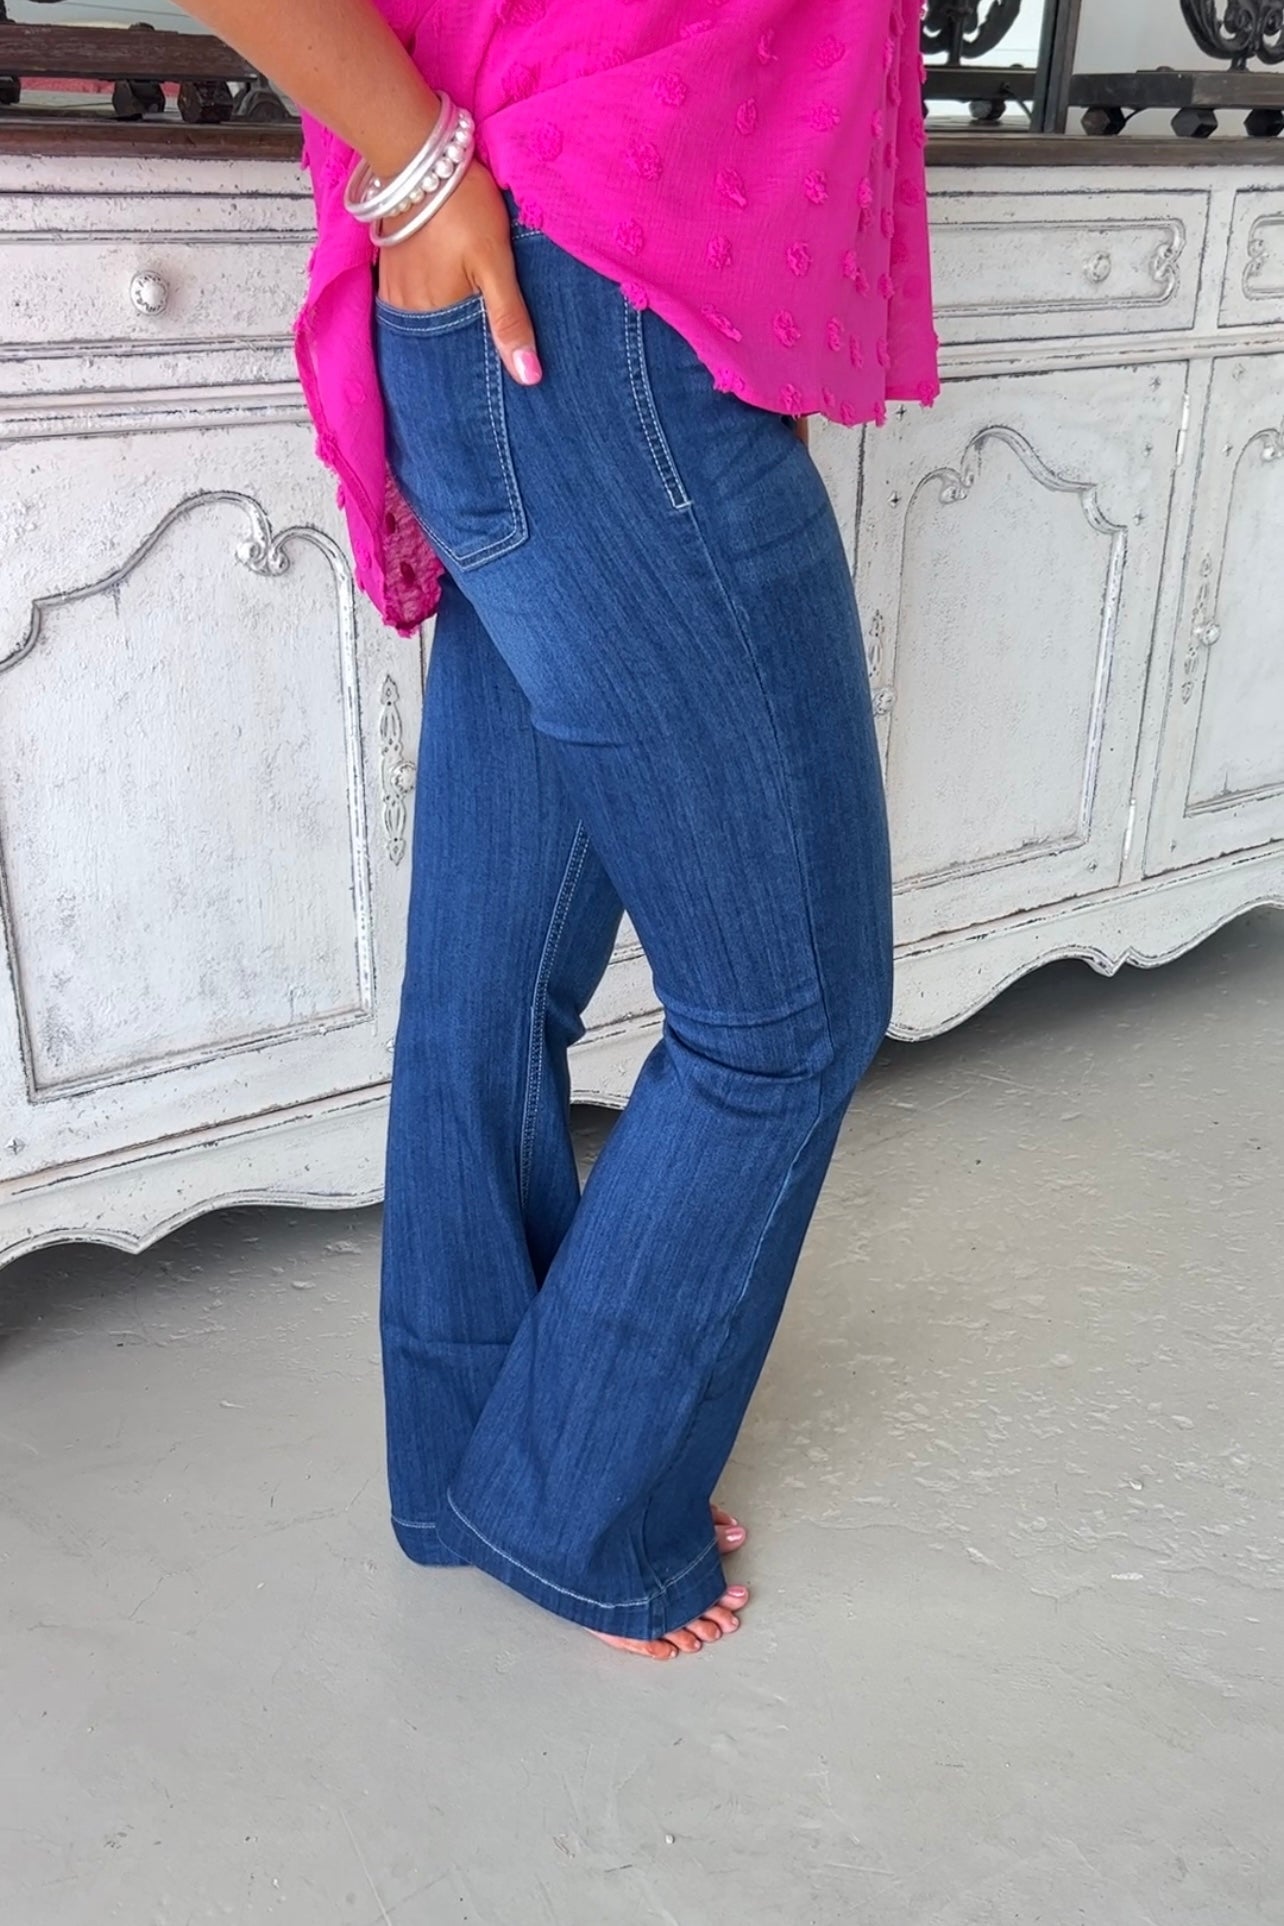 Hip Chick Jeans by Cello Pants Cello   